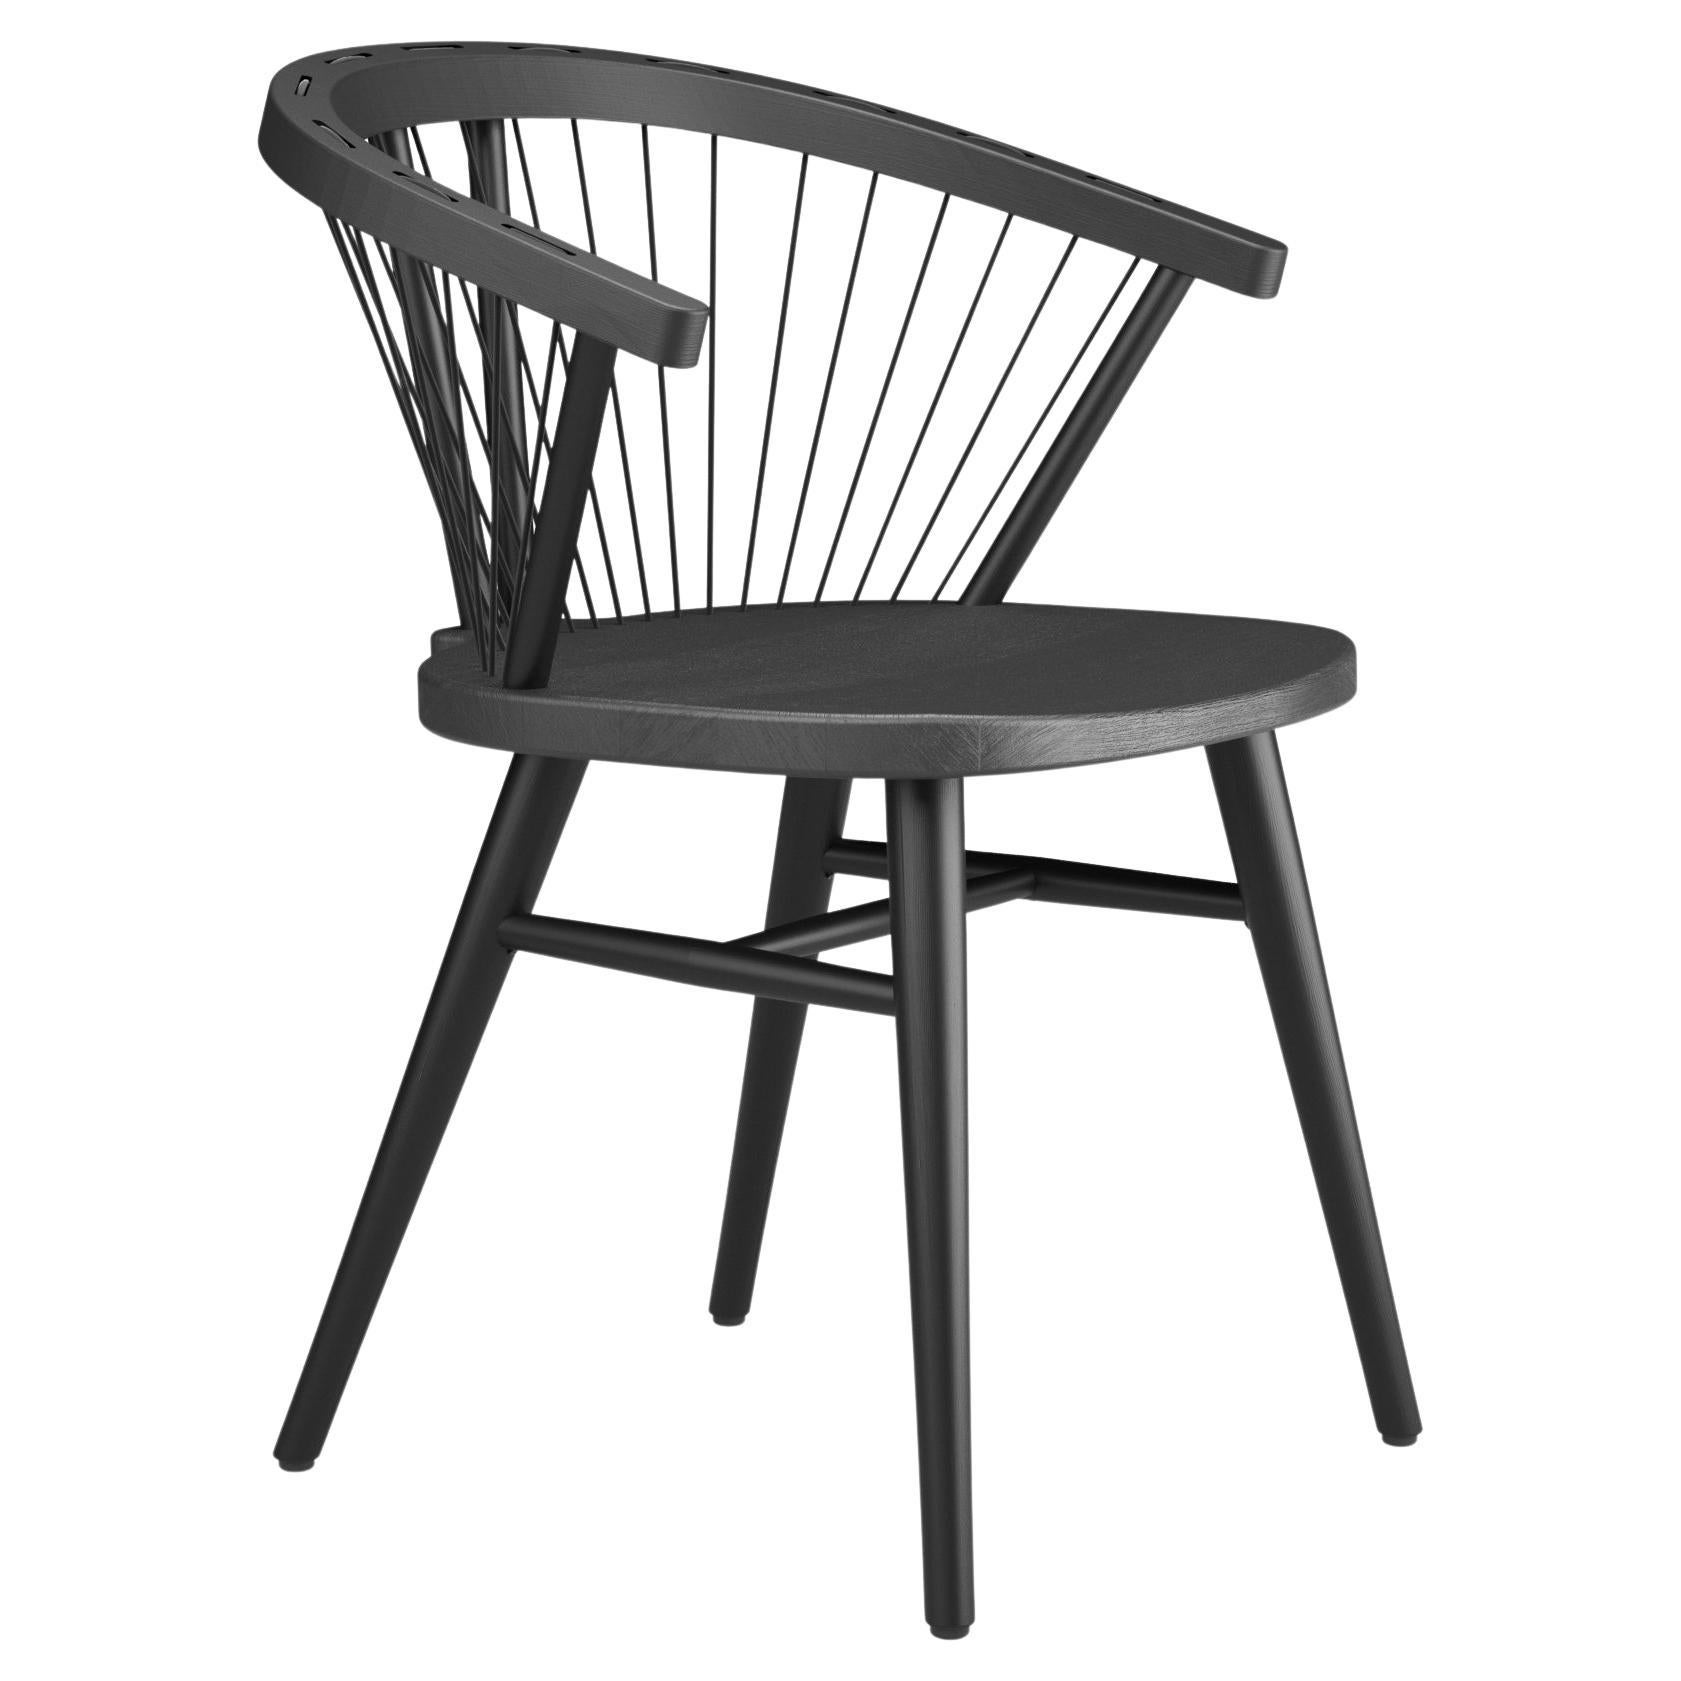 Hayche Cuerdas Rounded chair, Black, UK, Made To Order